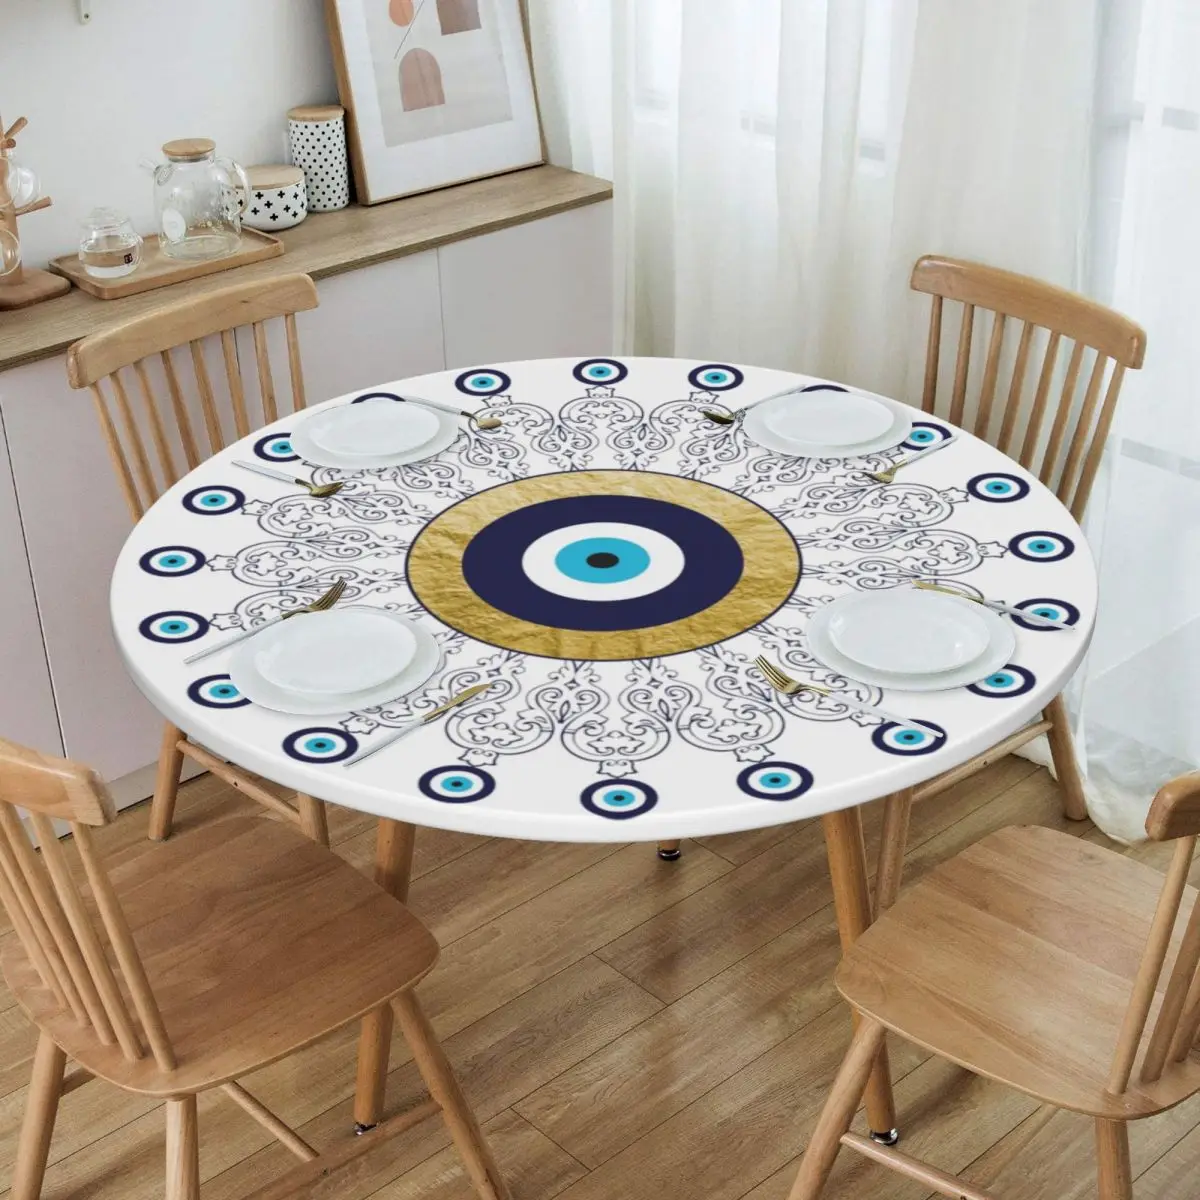 

Evil Eye Mandala In Gold And Blue Tablecloth Round Elastic Fitted Oilproof Lucky Charm Amulet Table Cloth Cover for Dining Room